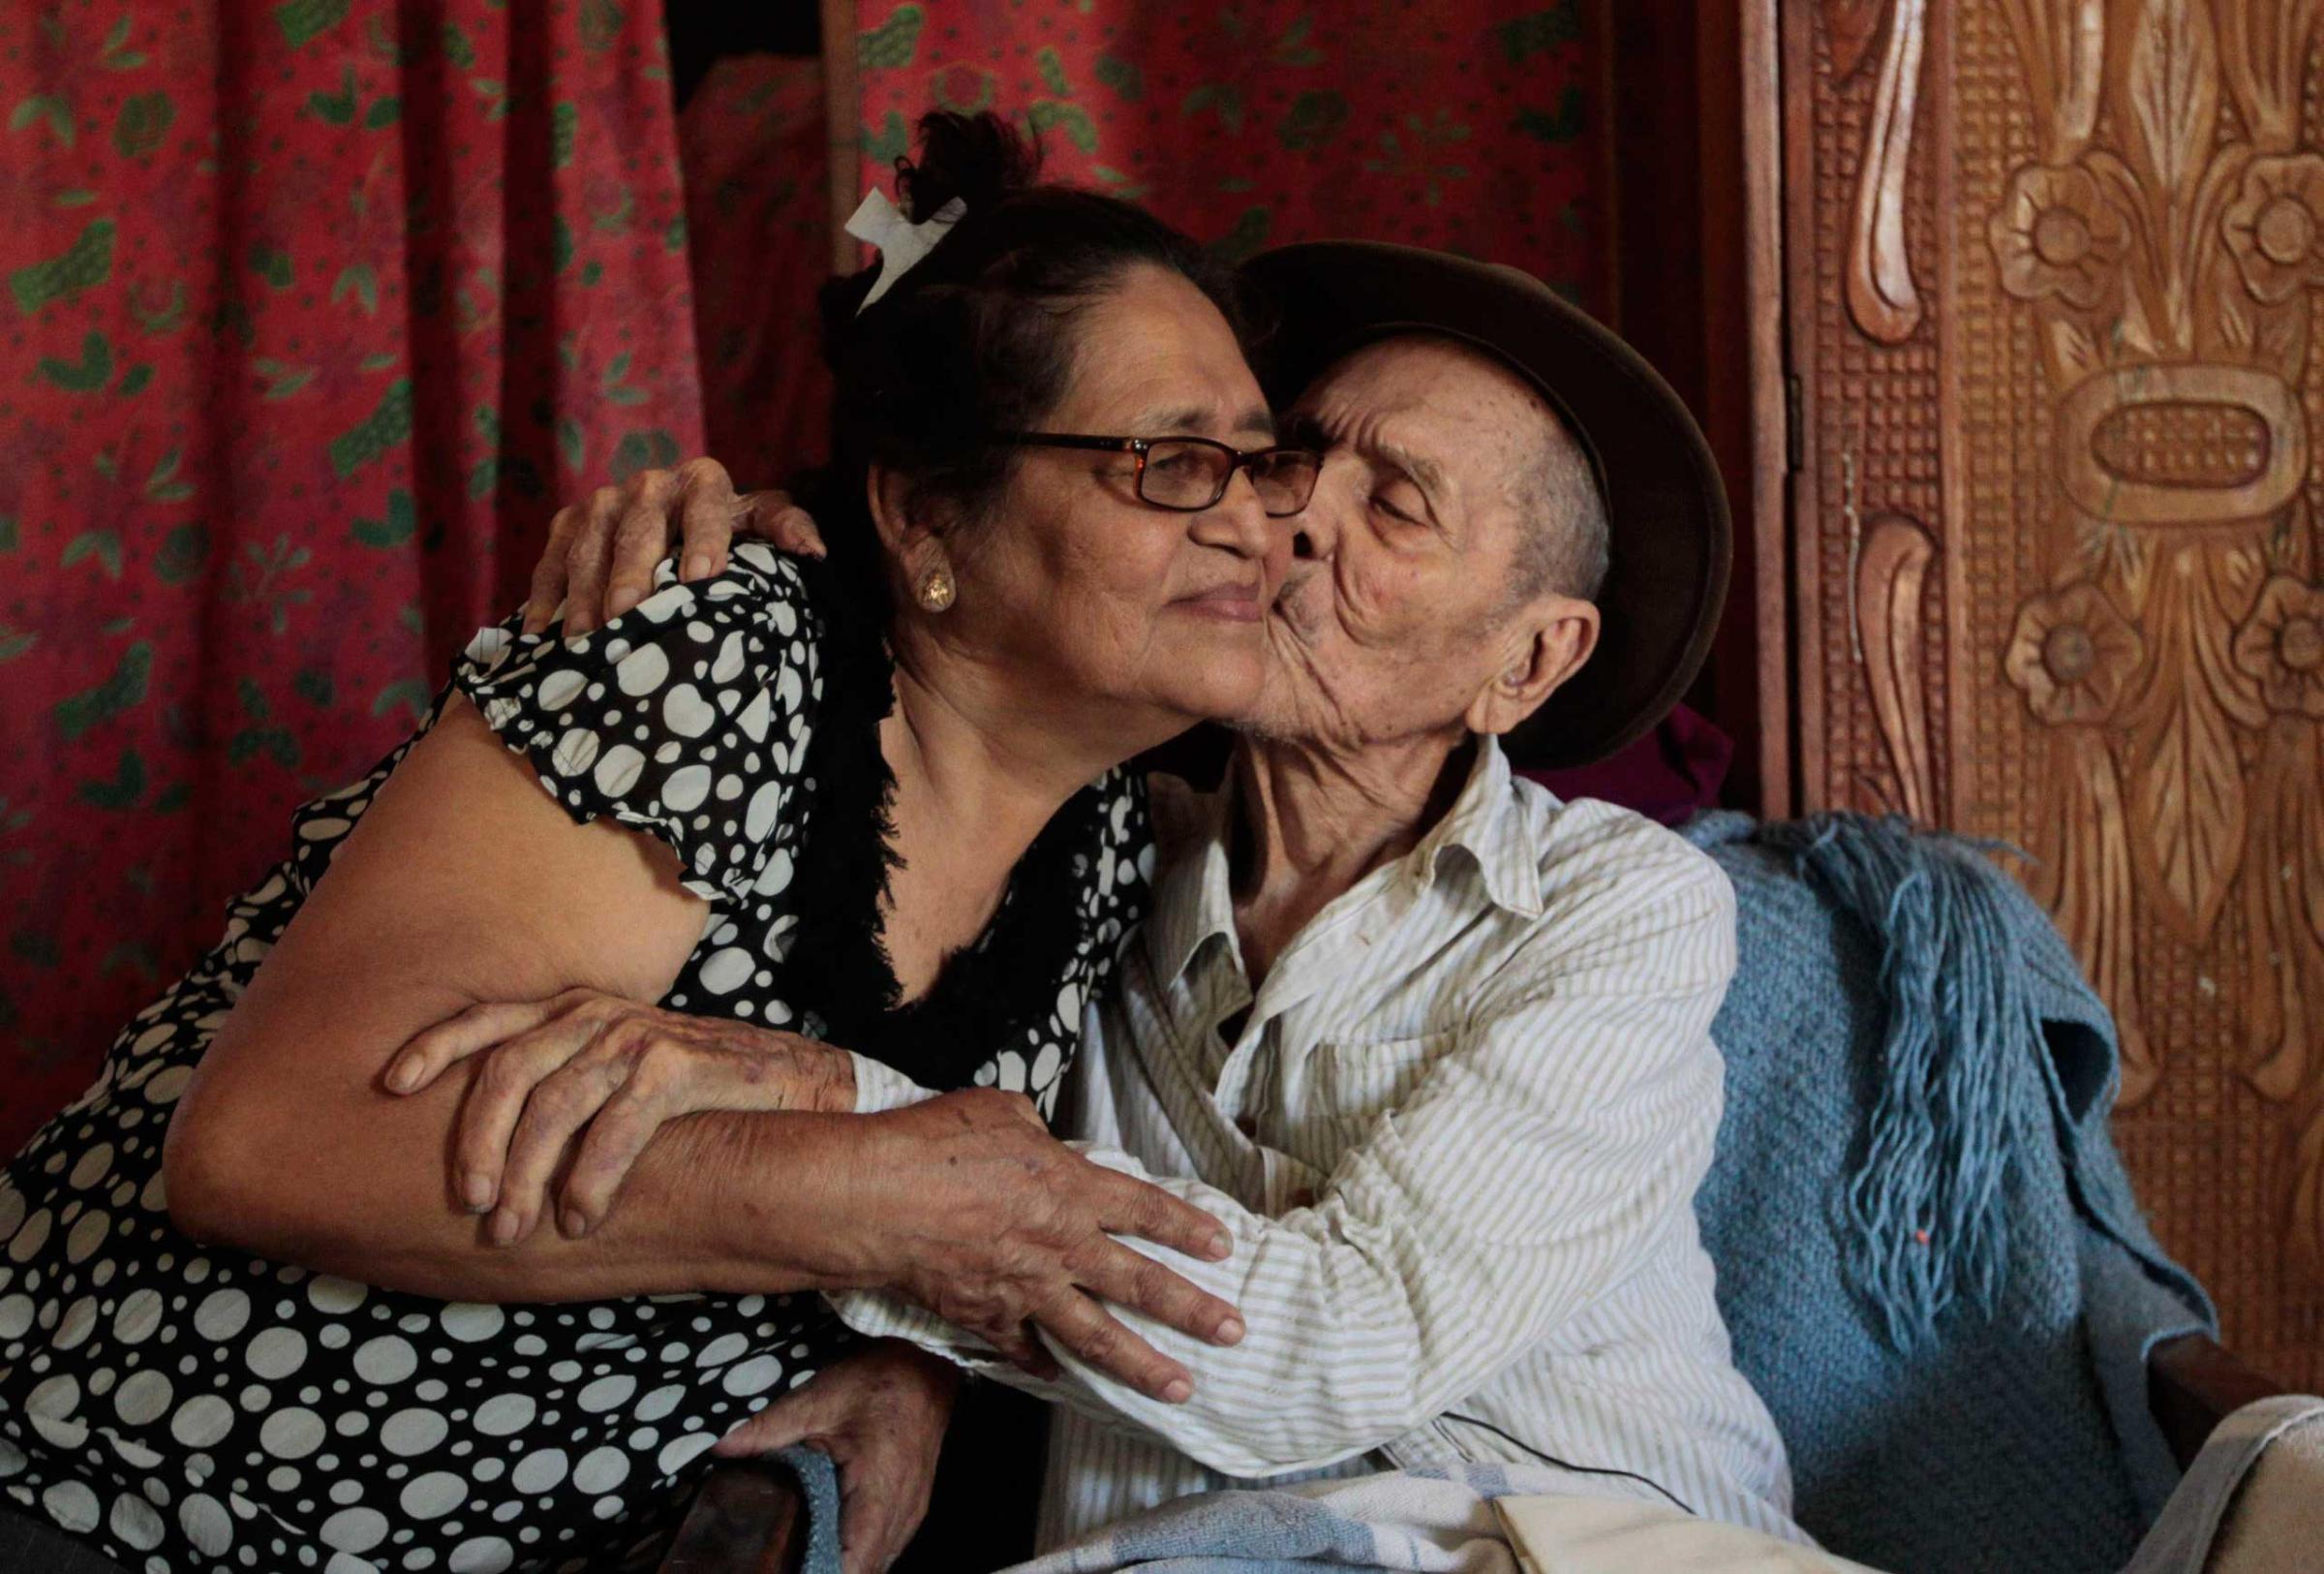 Hector Gaitan, 110, kisses his wife Nora Campo inside his home, at an abandoned station of the Nicaraguan Railway Company, the country's defunct railway in Managua.